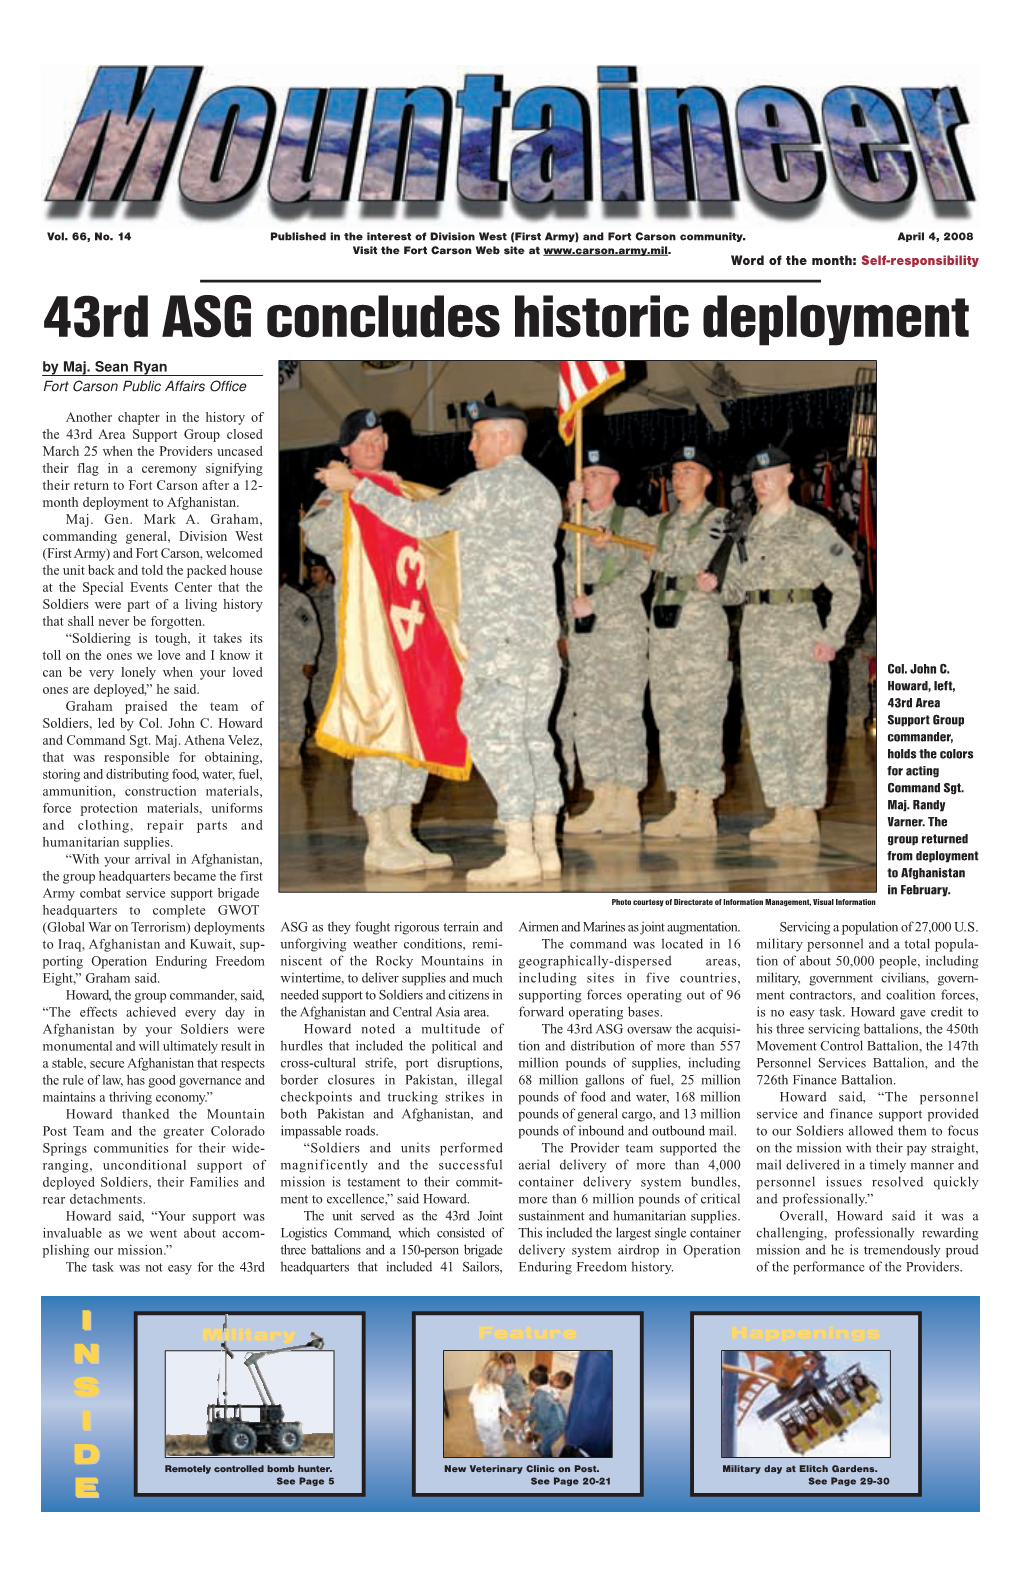 43Rd ASG Concludes Historic Deployment by Maj